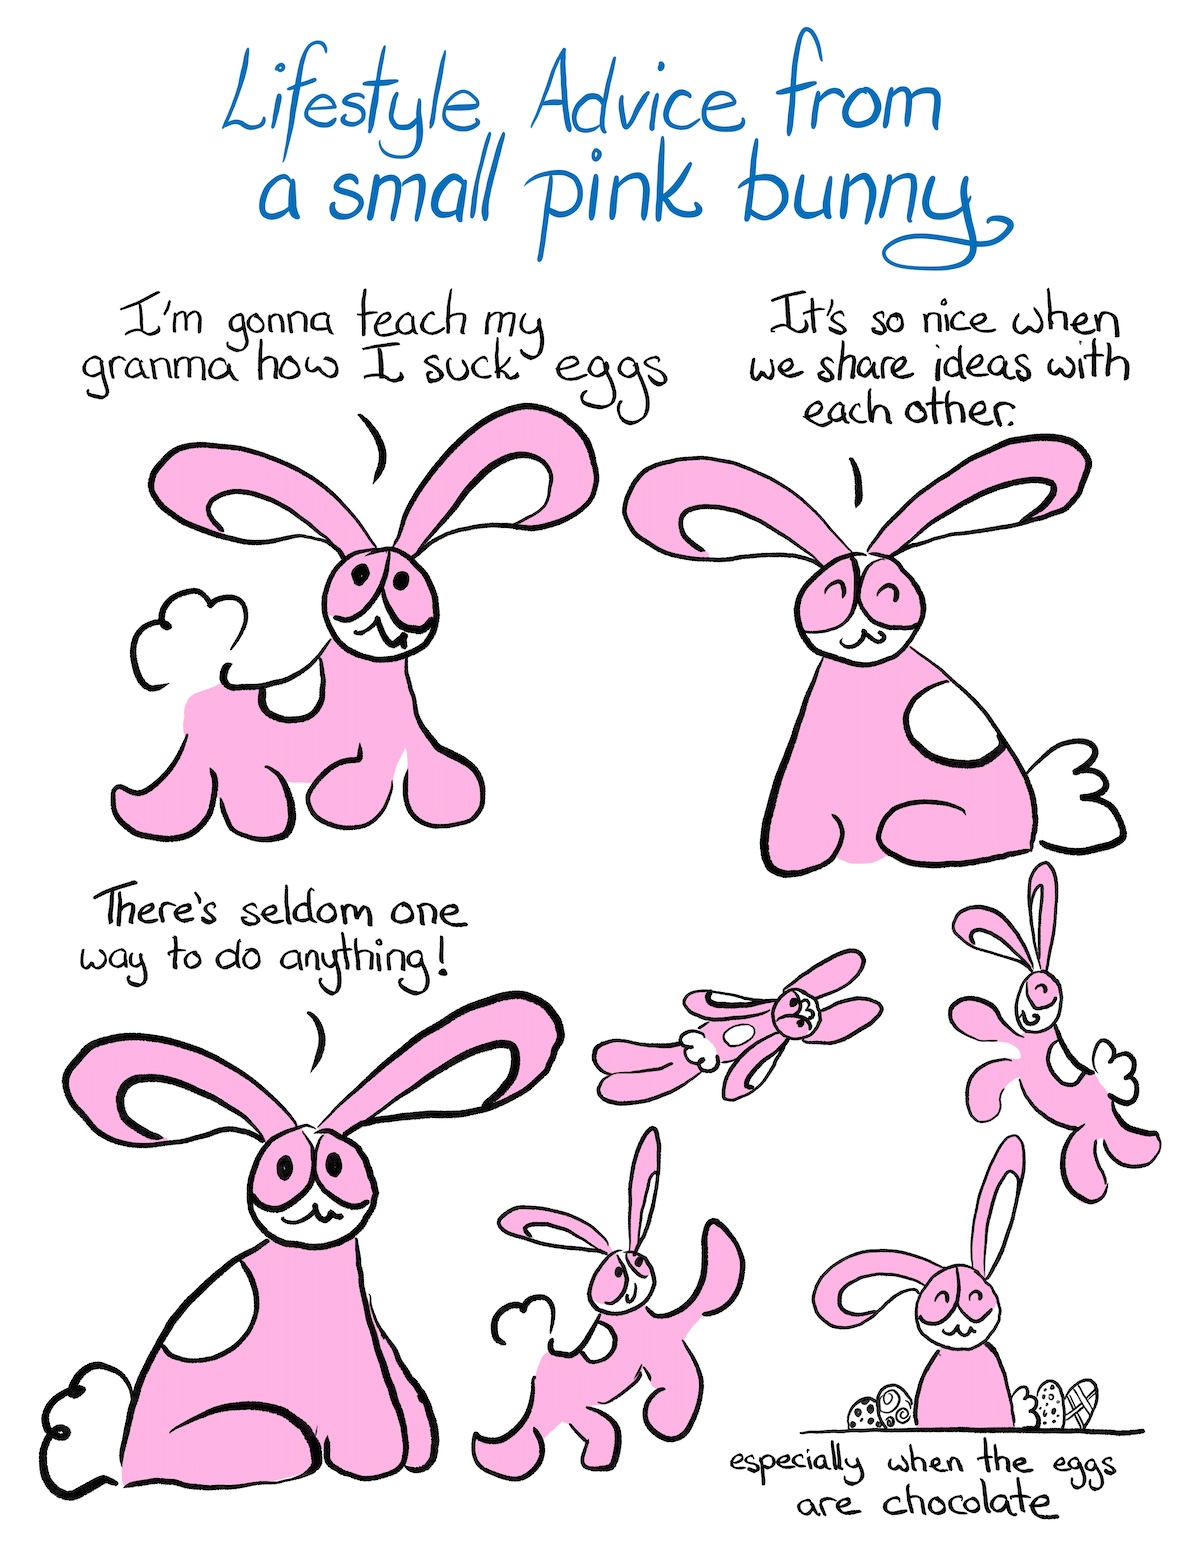 Lifestyle Advice from a Small Pink Bunny – Sucking Eggs (Comic #673)